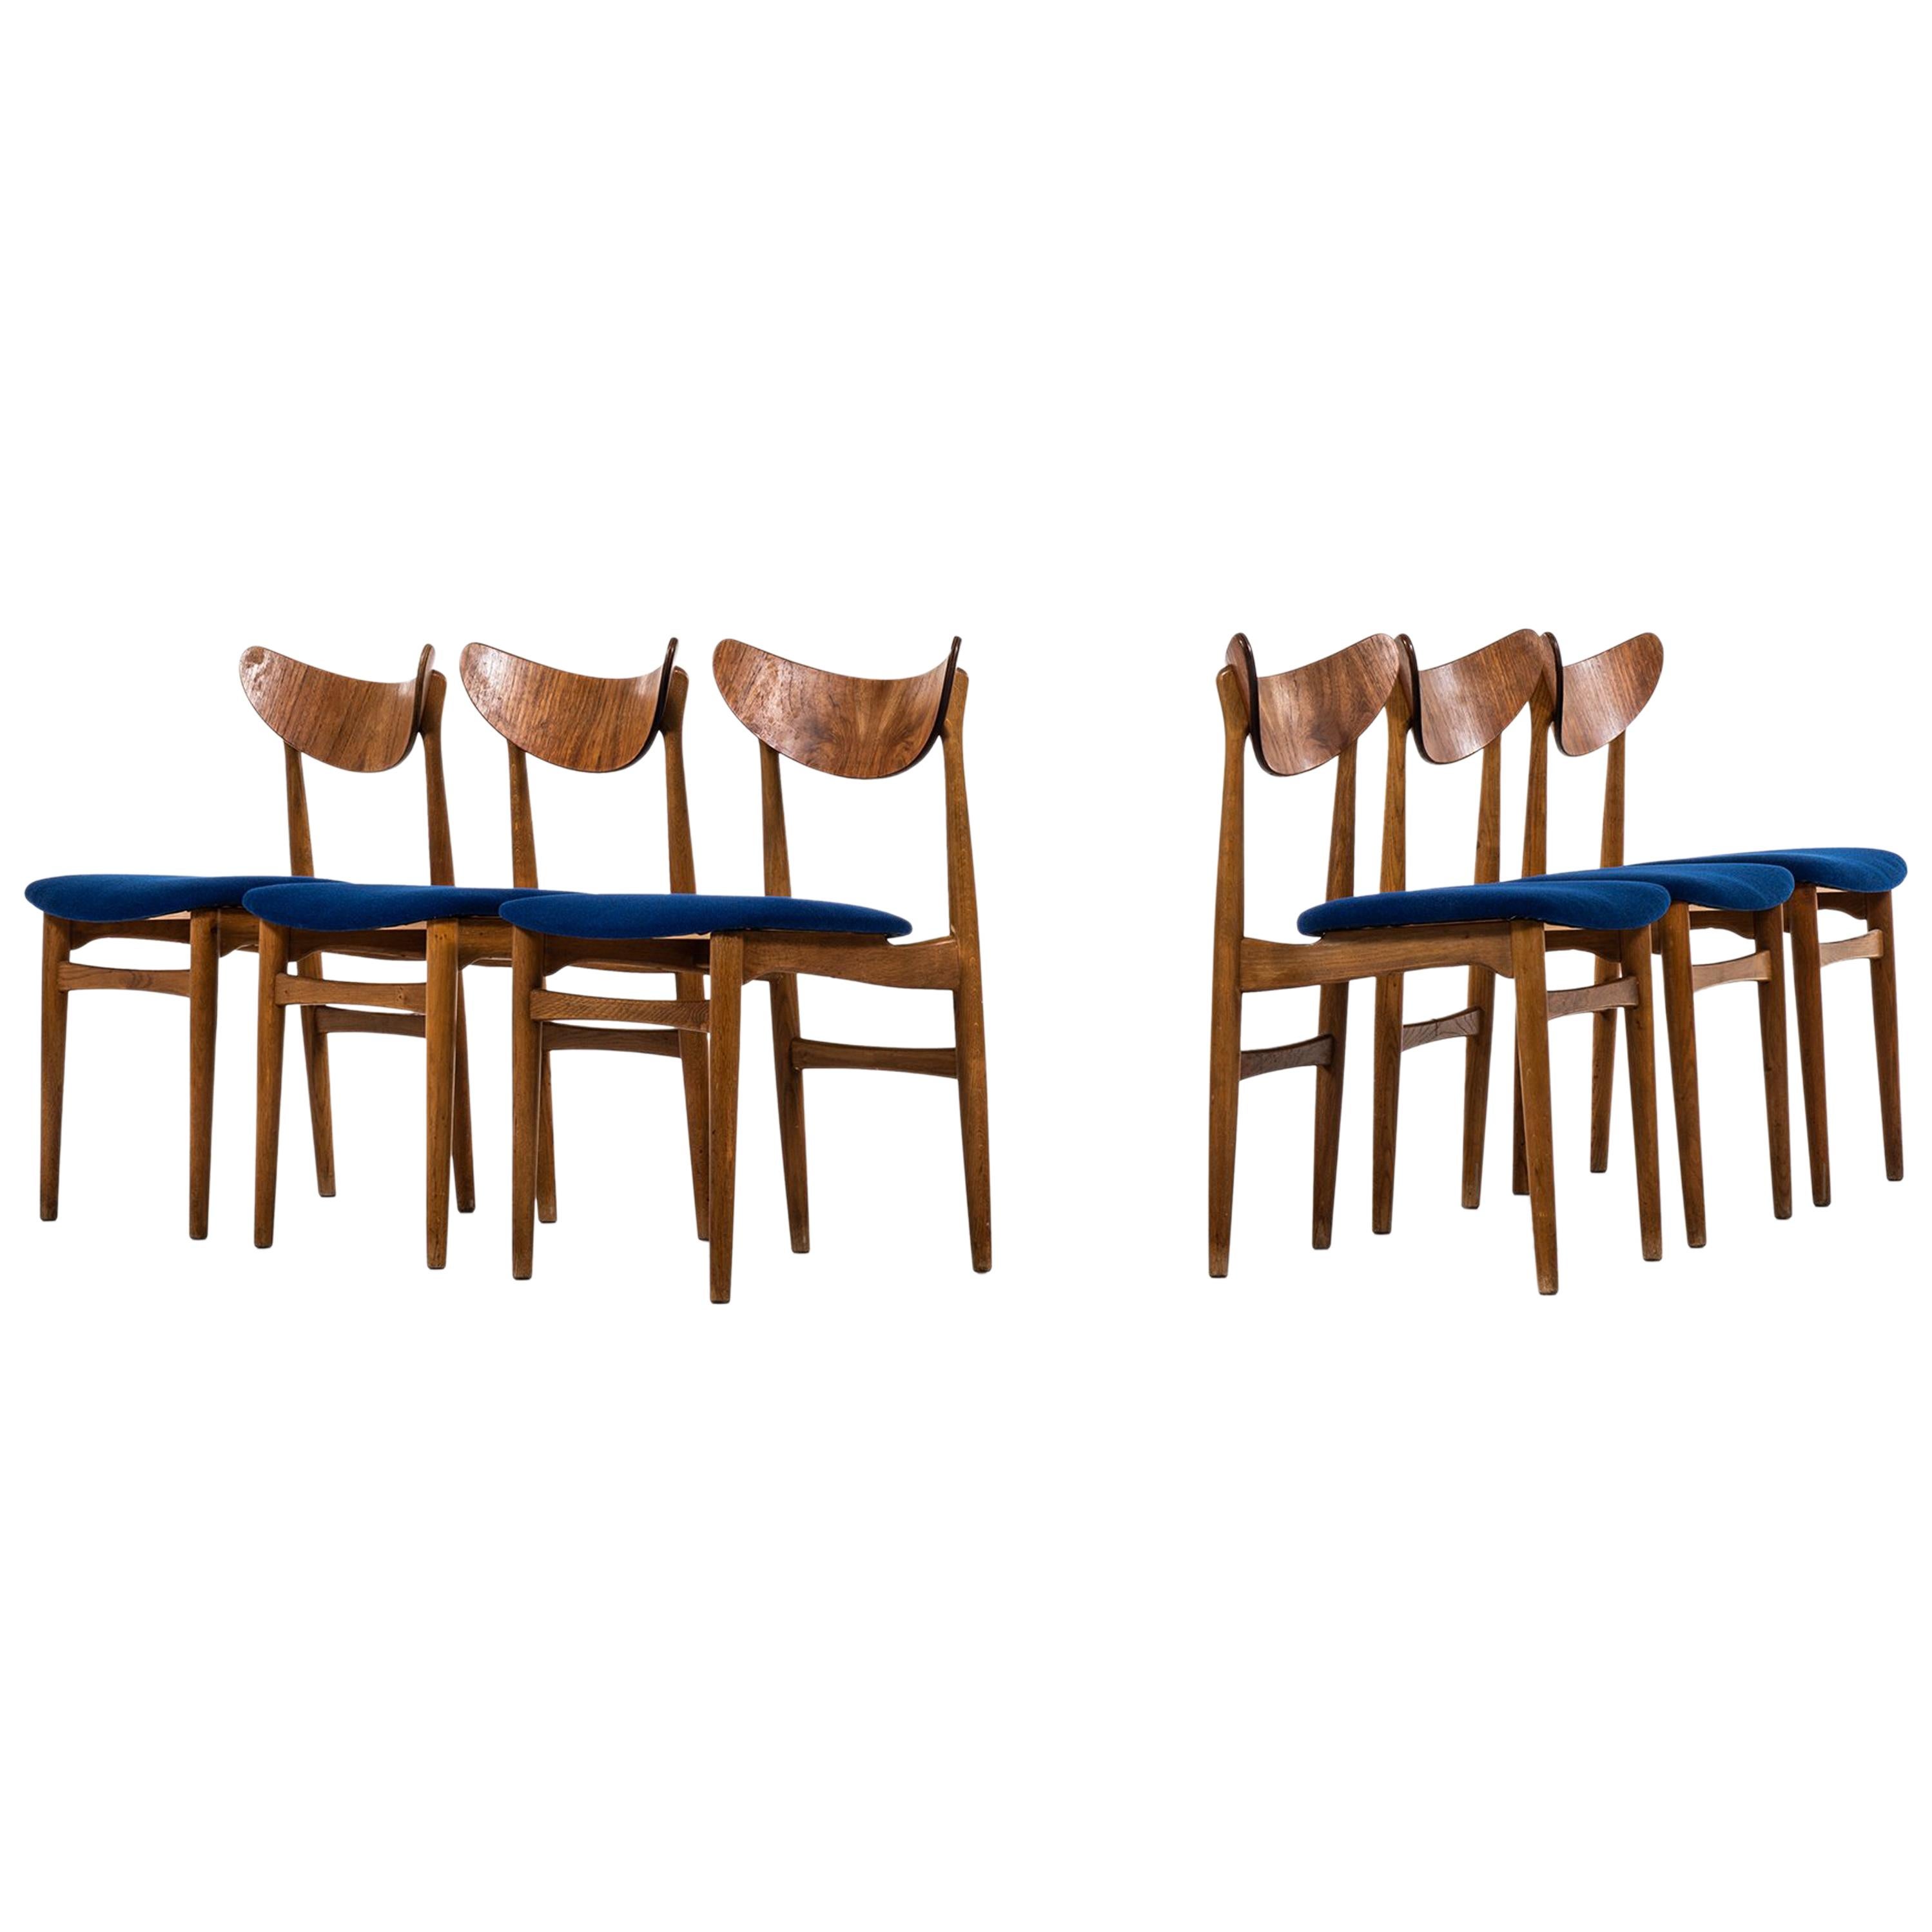 Set of Six Dining Chairs in Oak, Teak and Blue Fabric Produced in Denmark